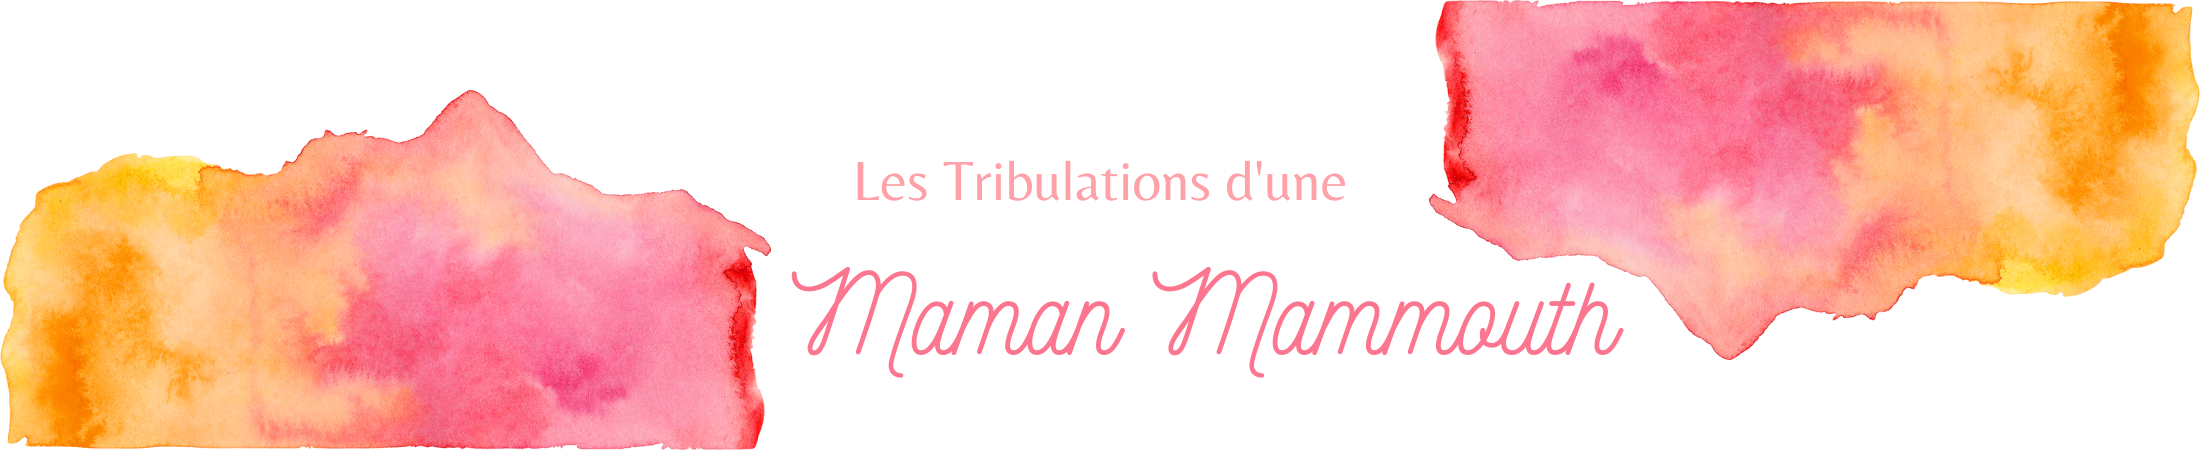 Maman Mammouth - Blog famille, lifestyle et lecture